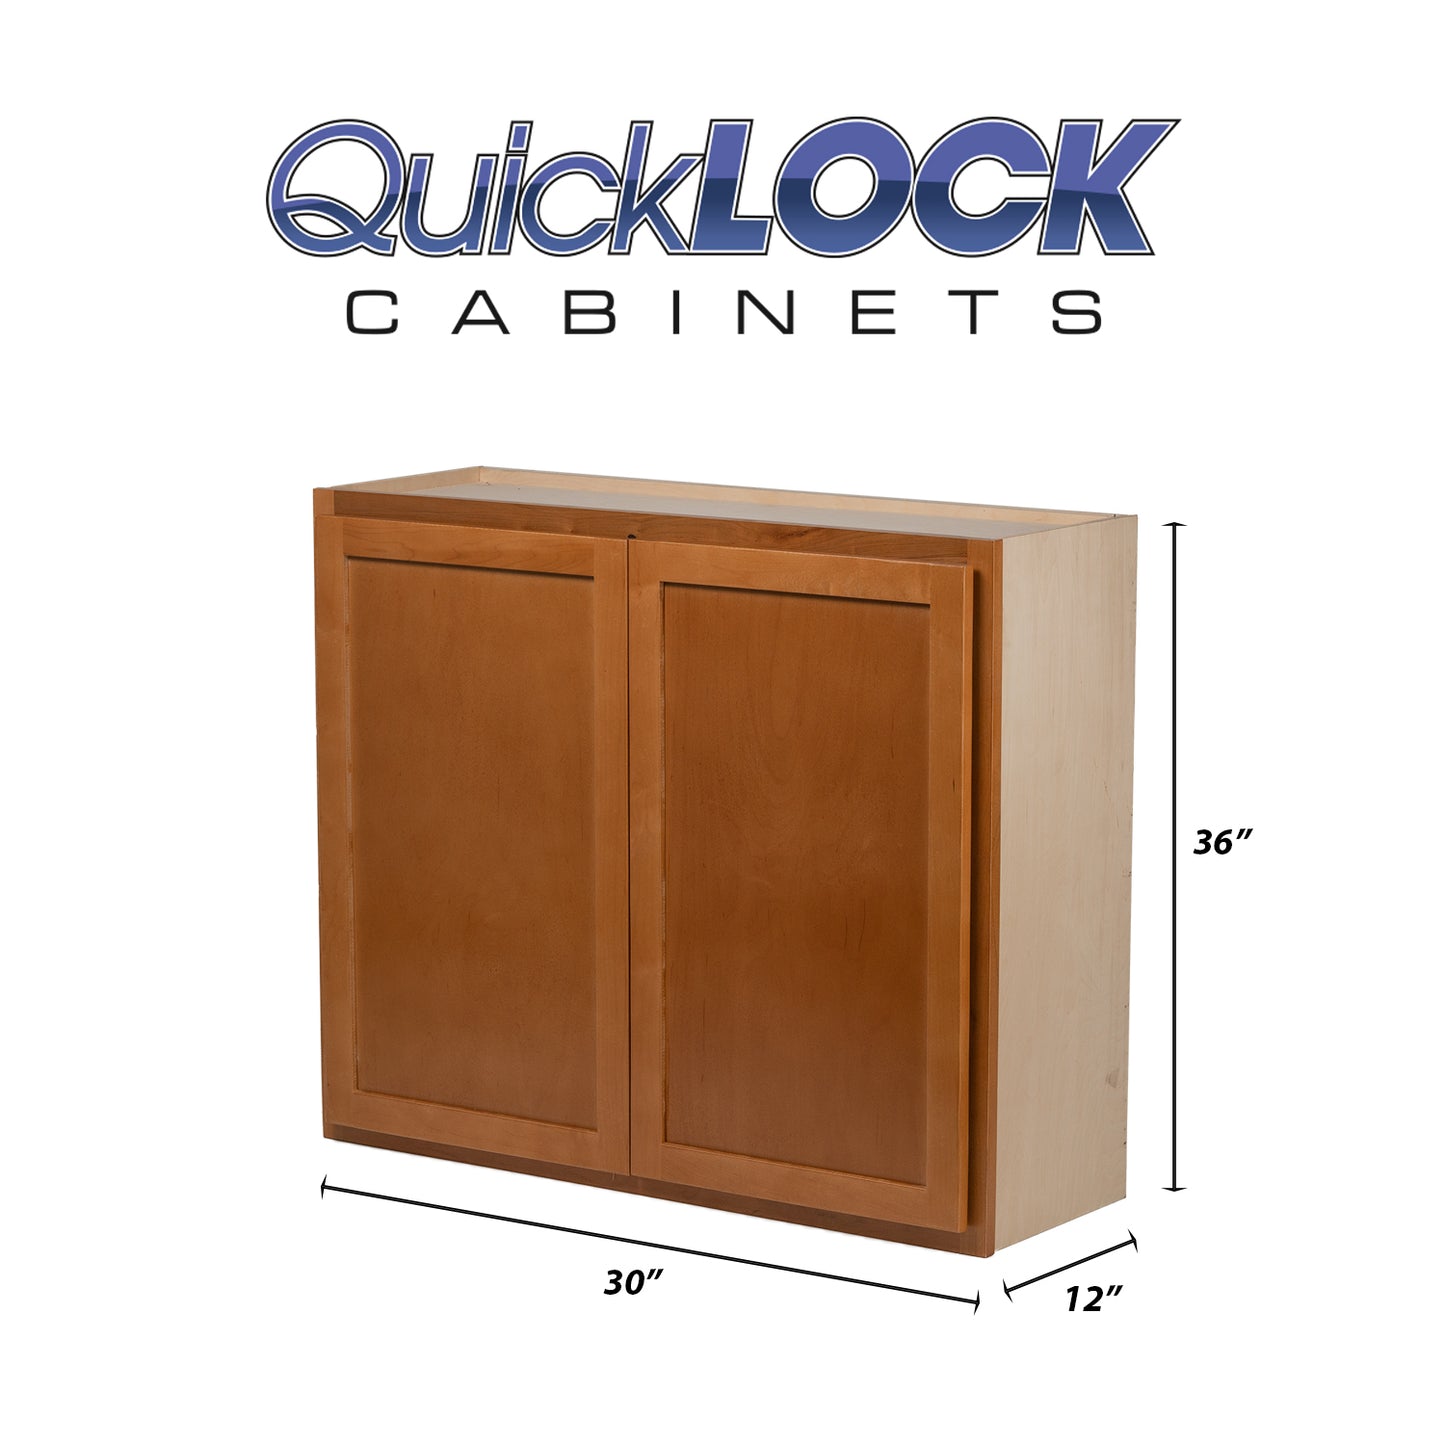 Quicklock RTA (Ready-to-Assemble) Provincial Stain 30"Wx36"Hx12"D Wall Cabinet